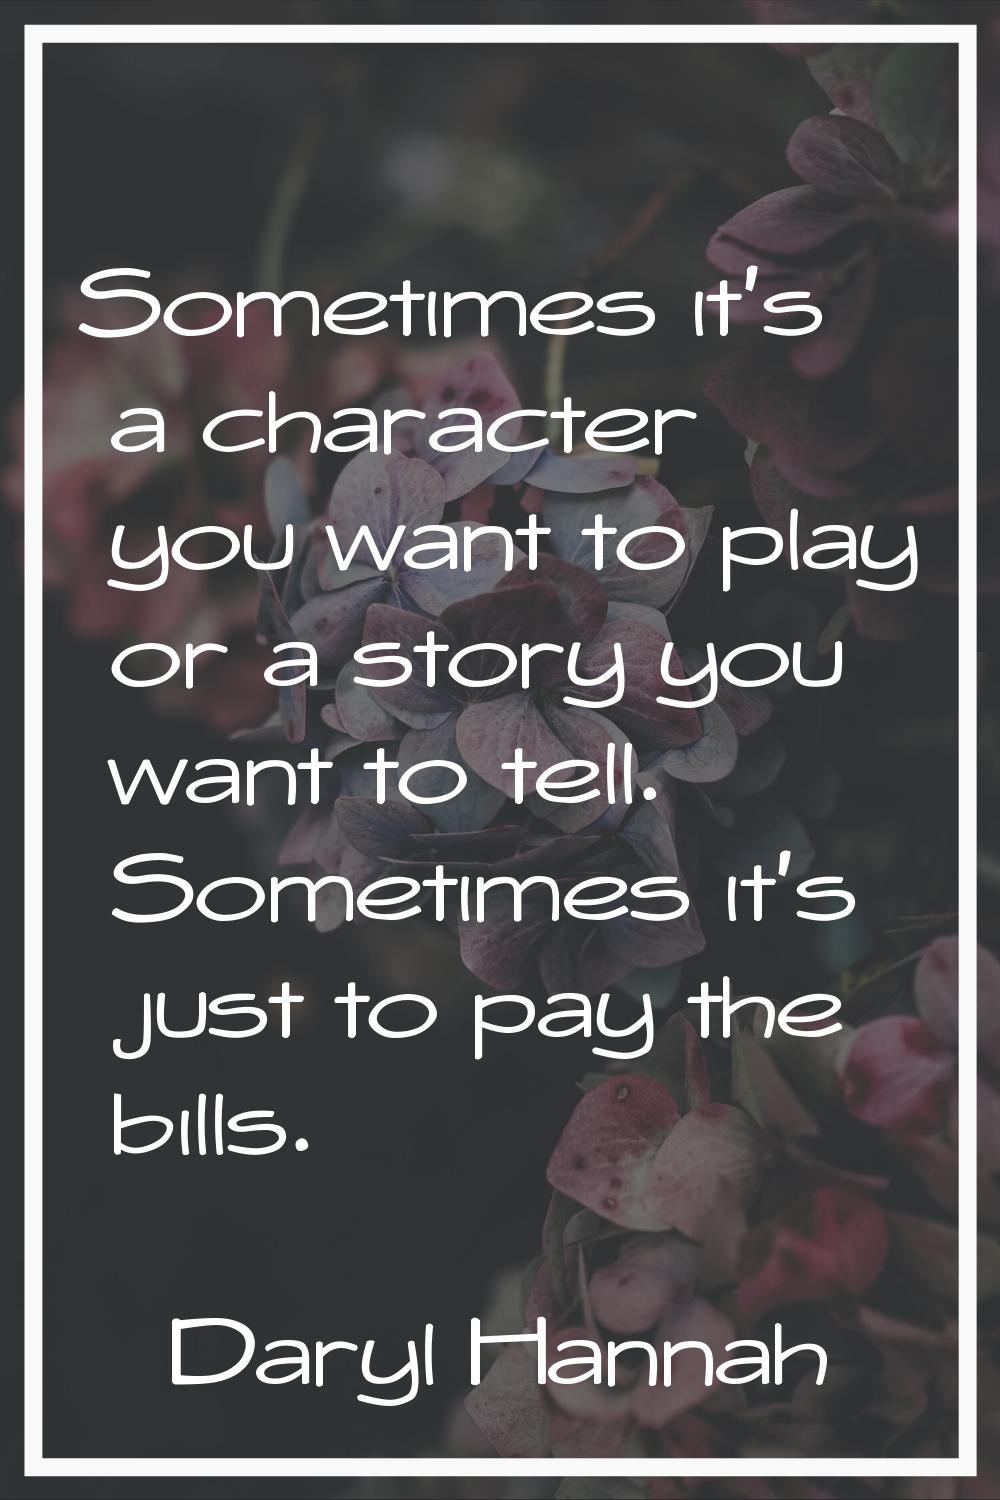 Sometimes it's a character you want to play or a story you want to tell. Sometimes it's just to pay